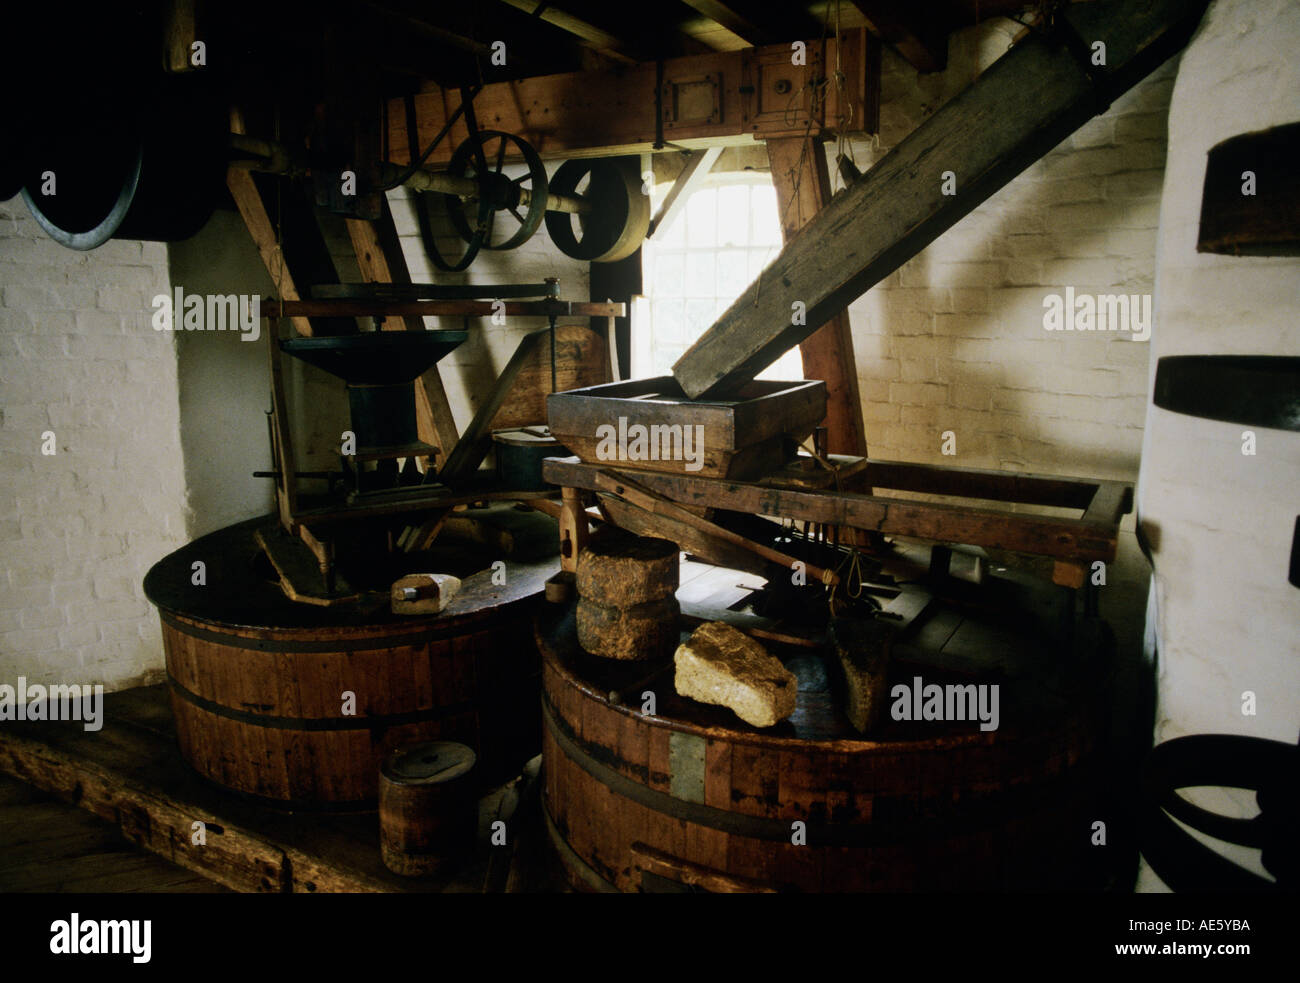 milling machinery in working order Saxted Green restored windmill Stock Photo